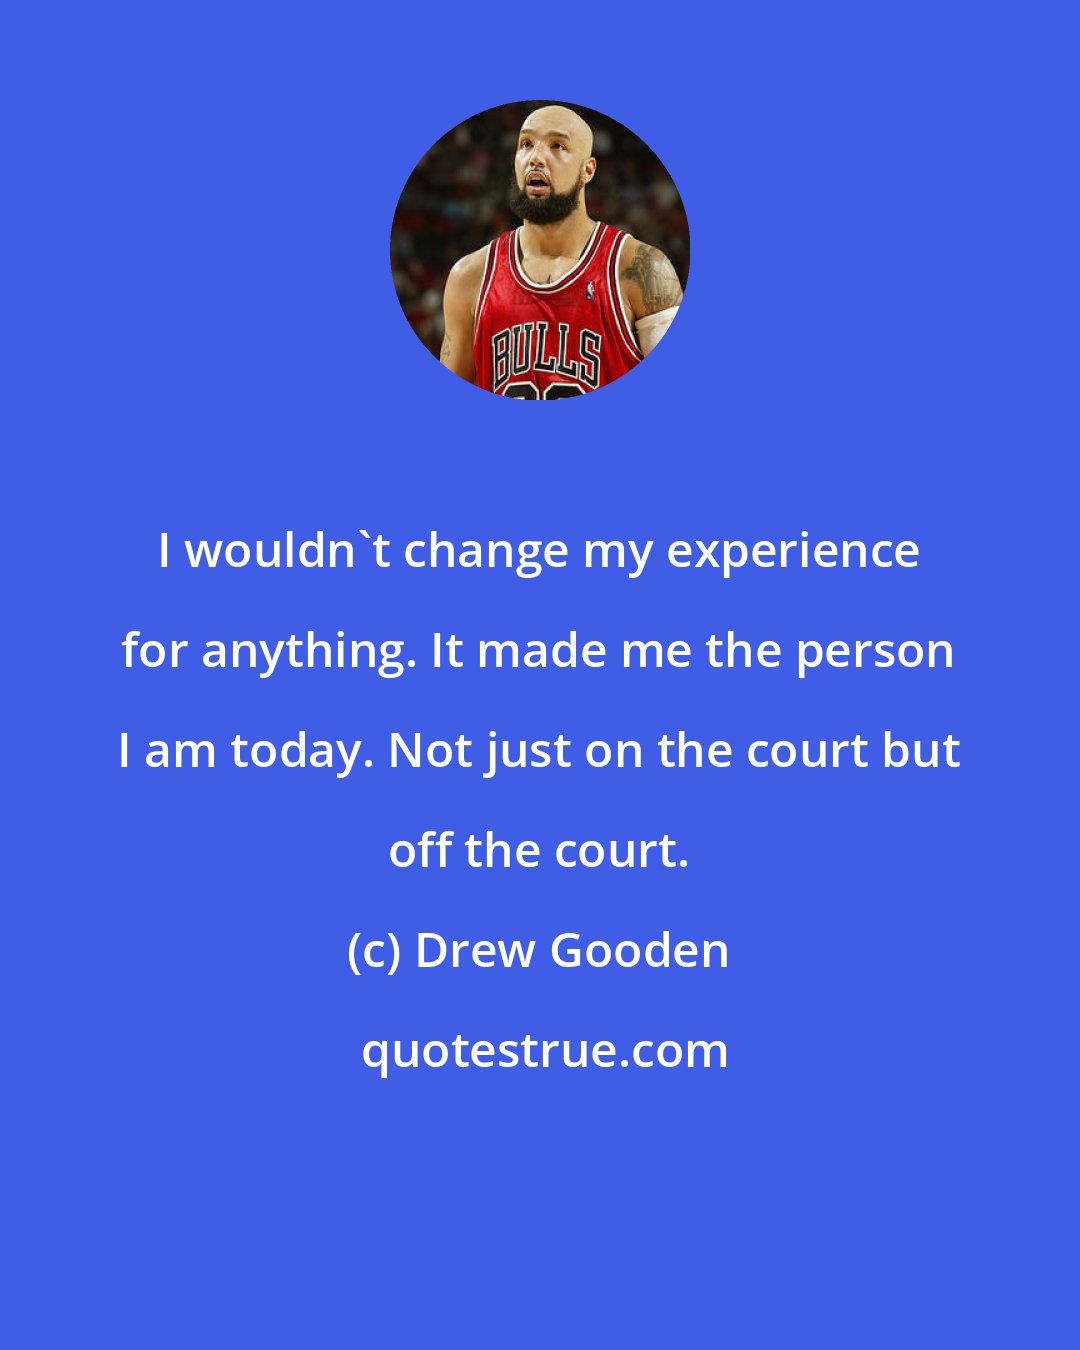 Drew Gooden: I wouldn't change my experience for anything. It made me the person I am today. Not just on the court but off the court.